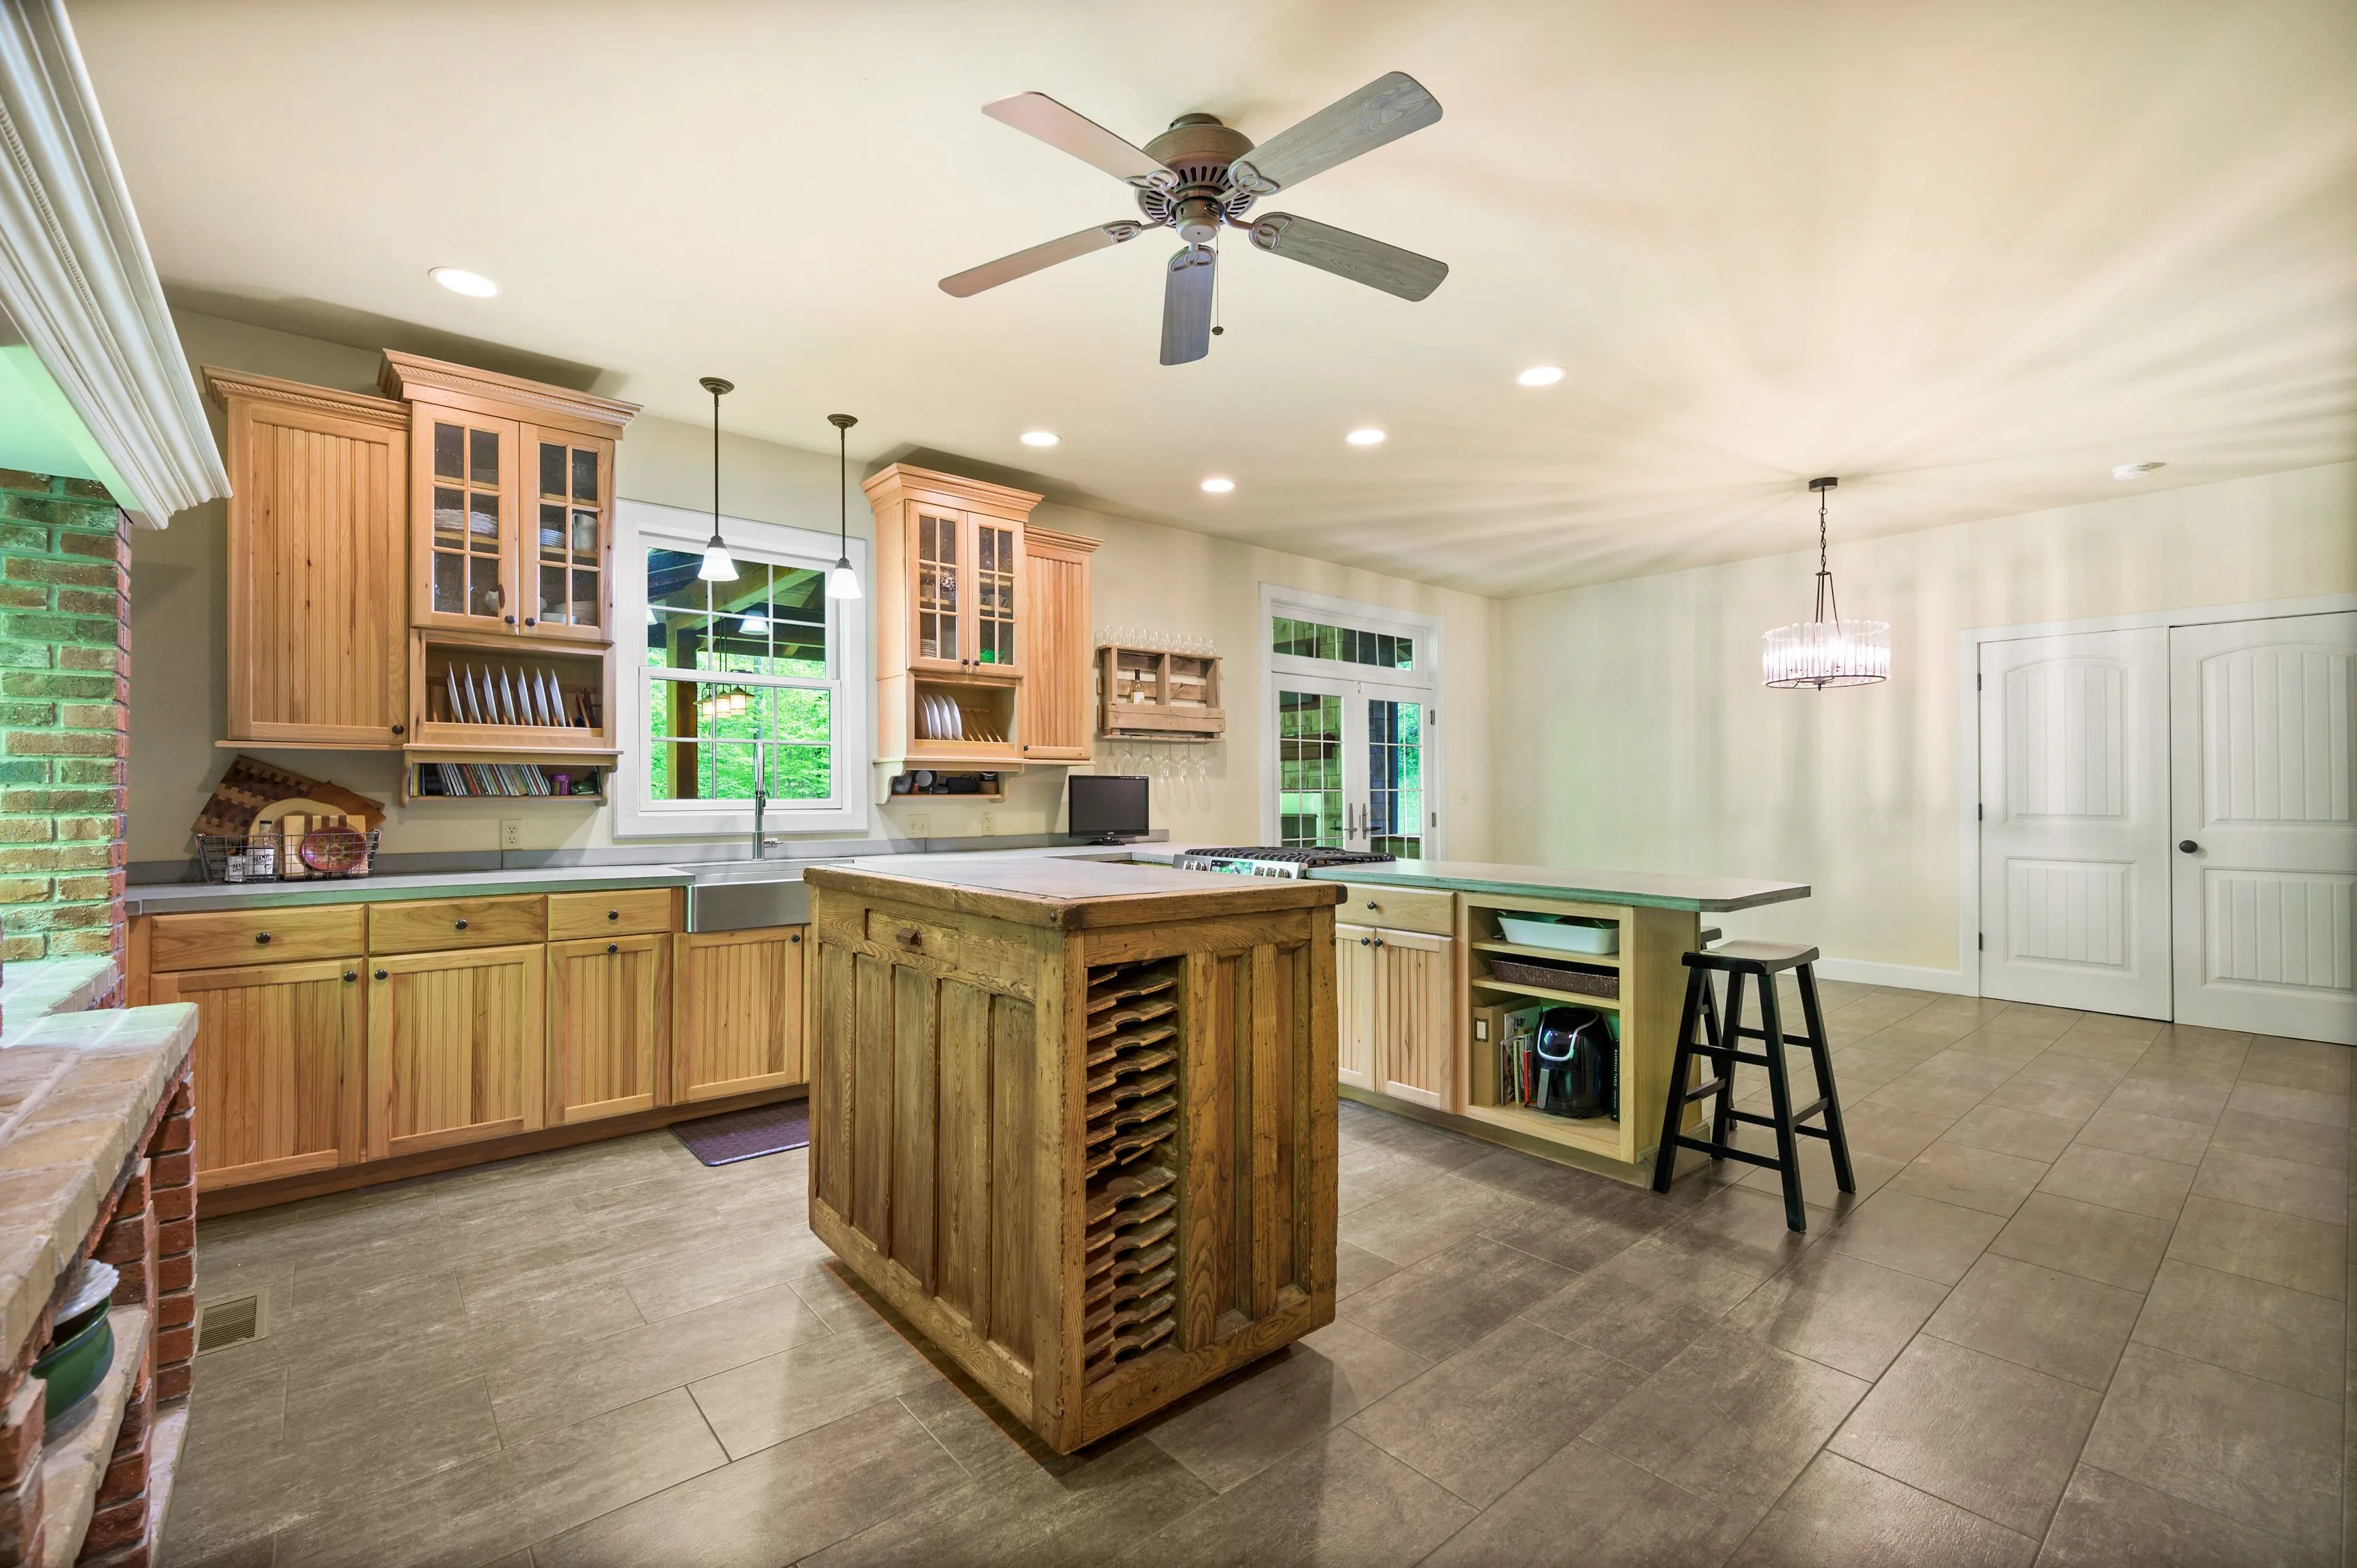 Spacious kitchen interior with wooden cabinets, central island, modern appliances, and pendant lighting.